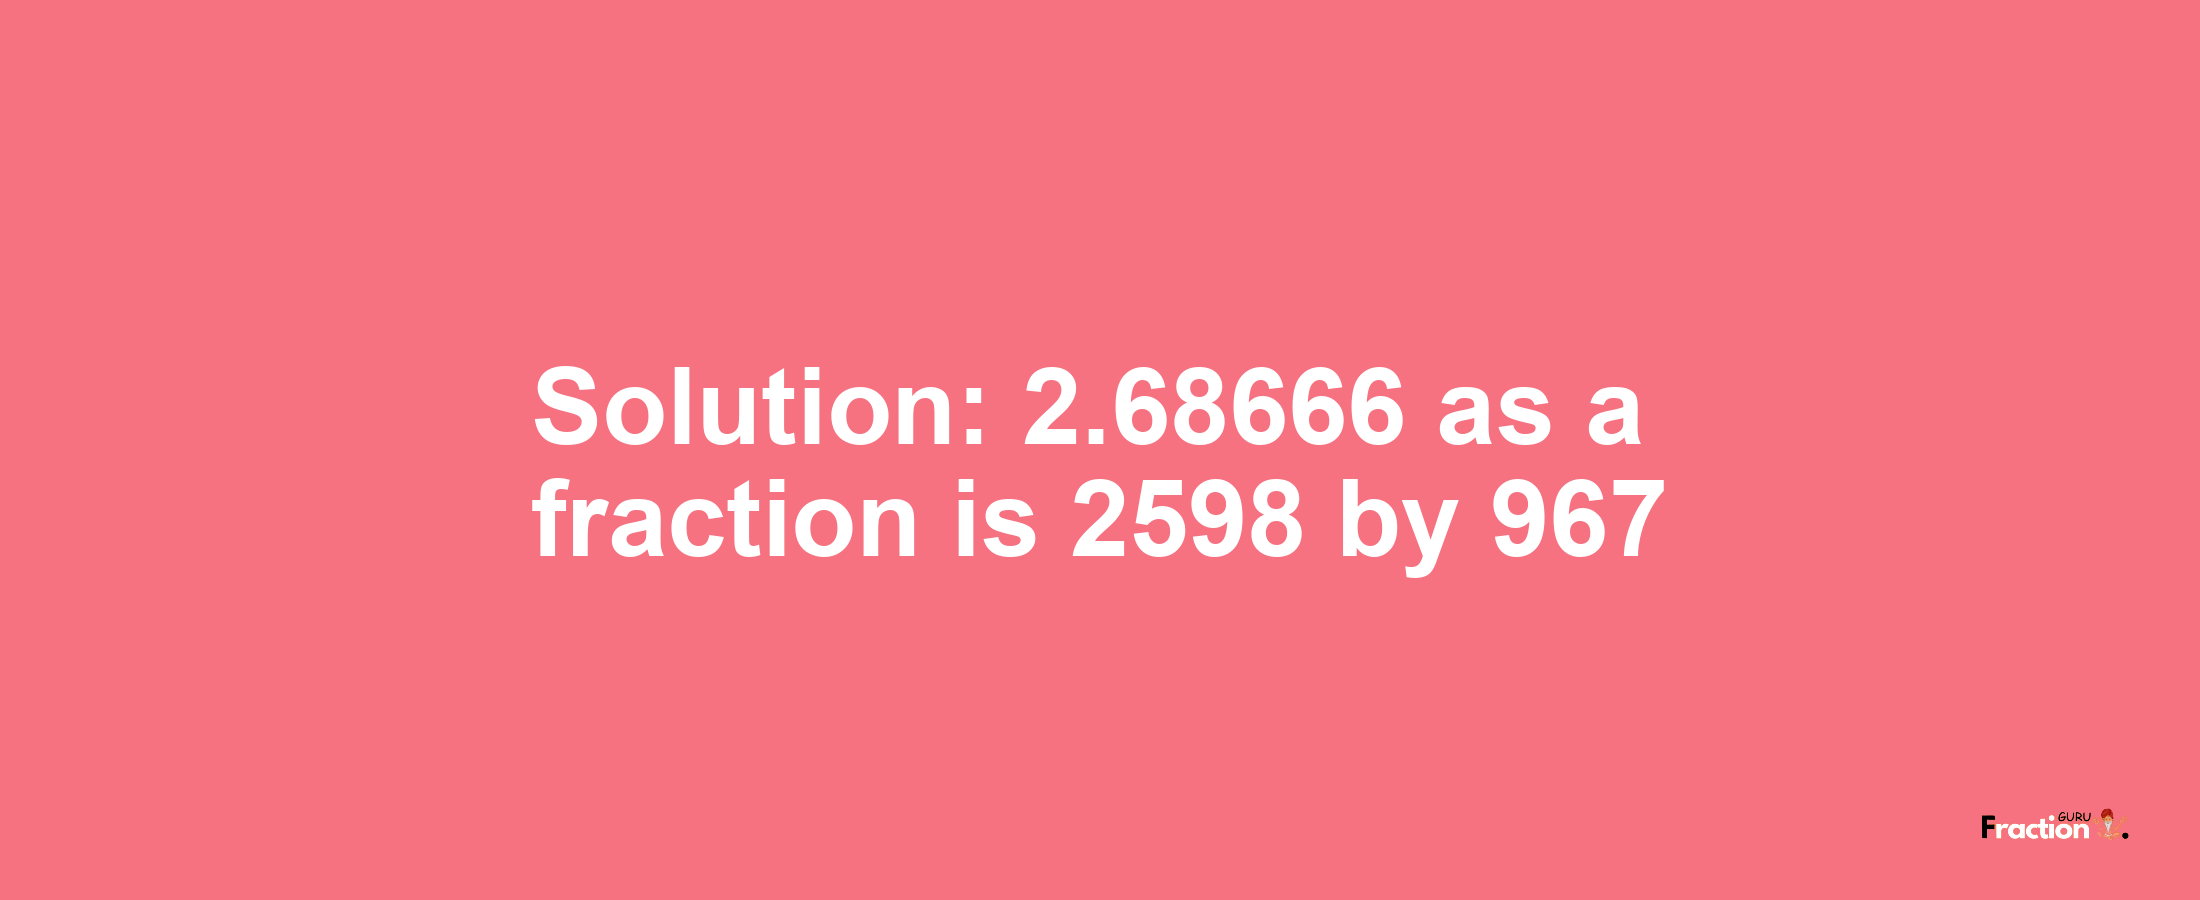 Solution:2.68666 as a fraction is 2598/967